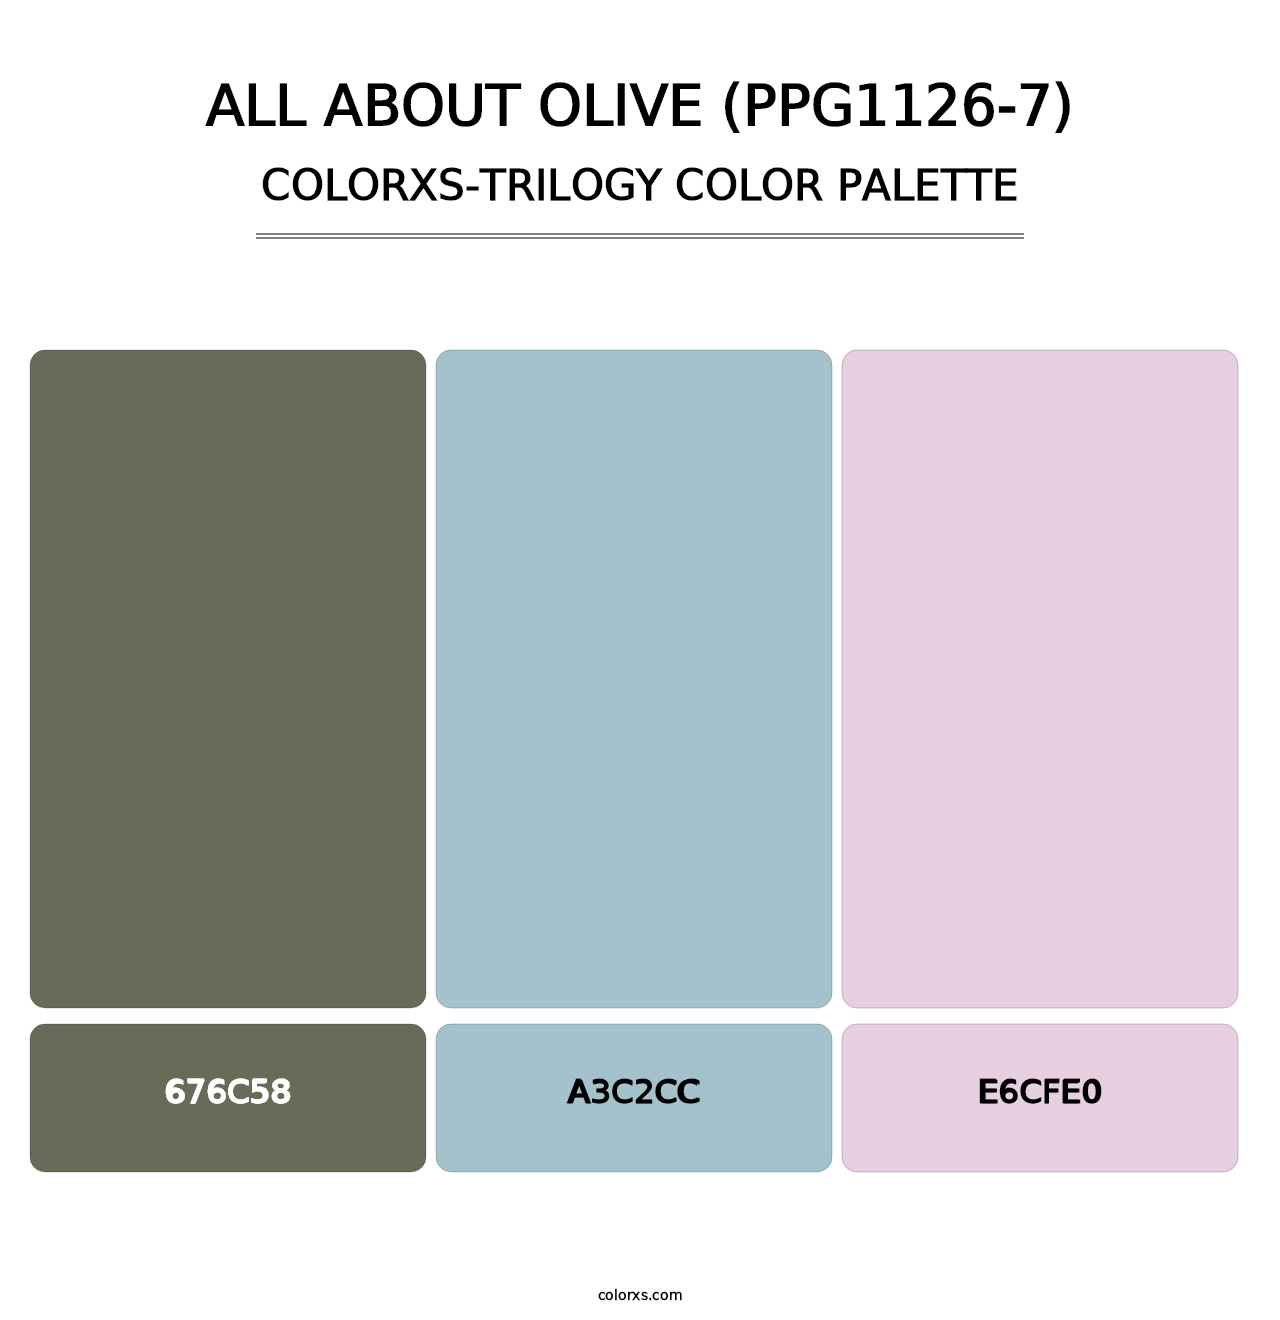 All About Olive (PPG1126-7) - Colorxs Trilogy Palette